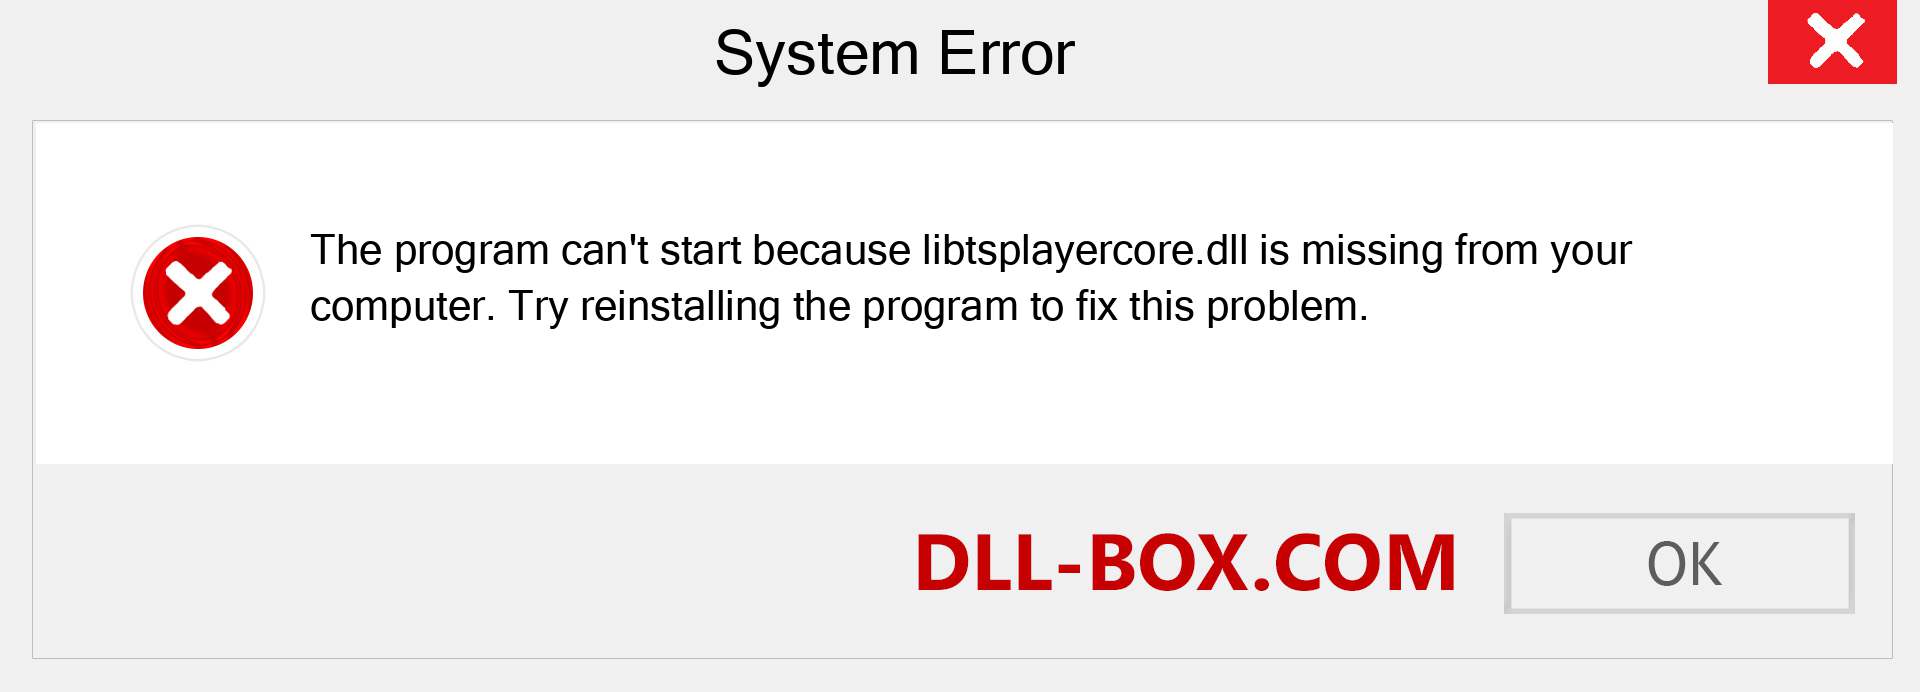  libtsplayercore.dll file is missing?. Download for Windows 7, 8, 10 - Fix  libtsplayercore dll Missing Error on Windows, photos, images